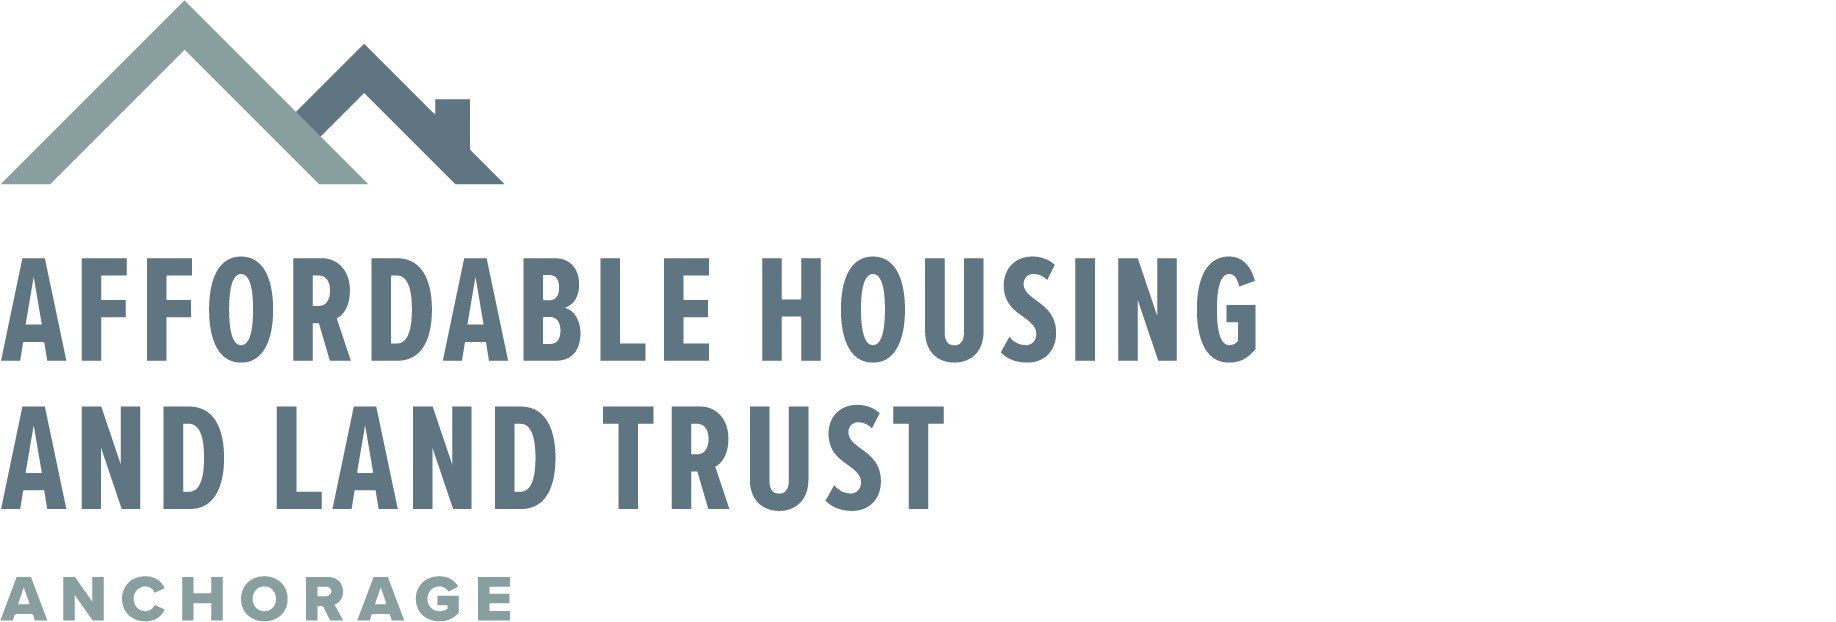 Anchorage Affordable Housing and Land Trust Logo